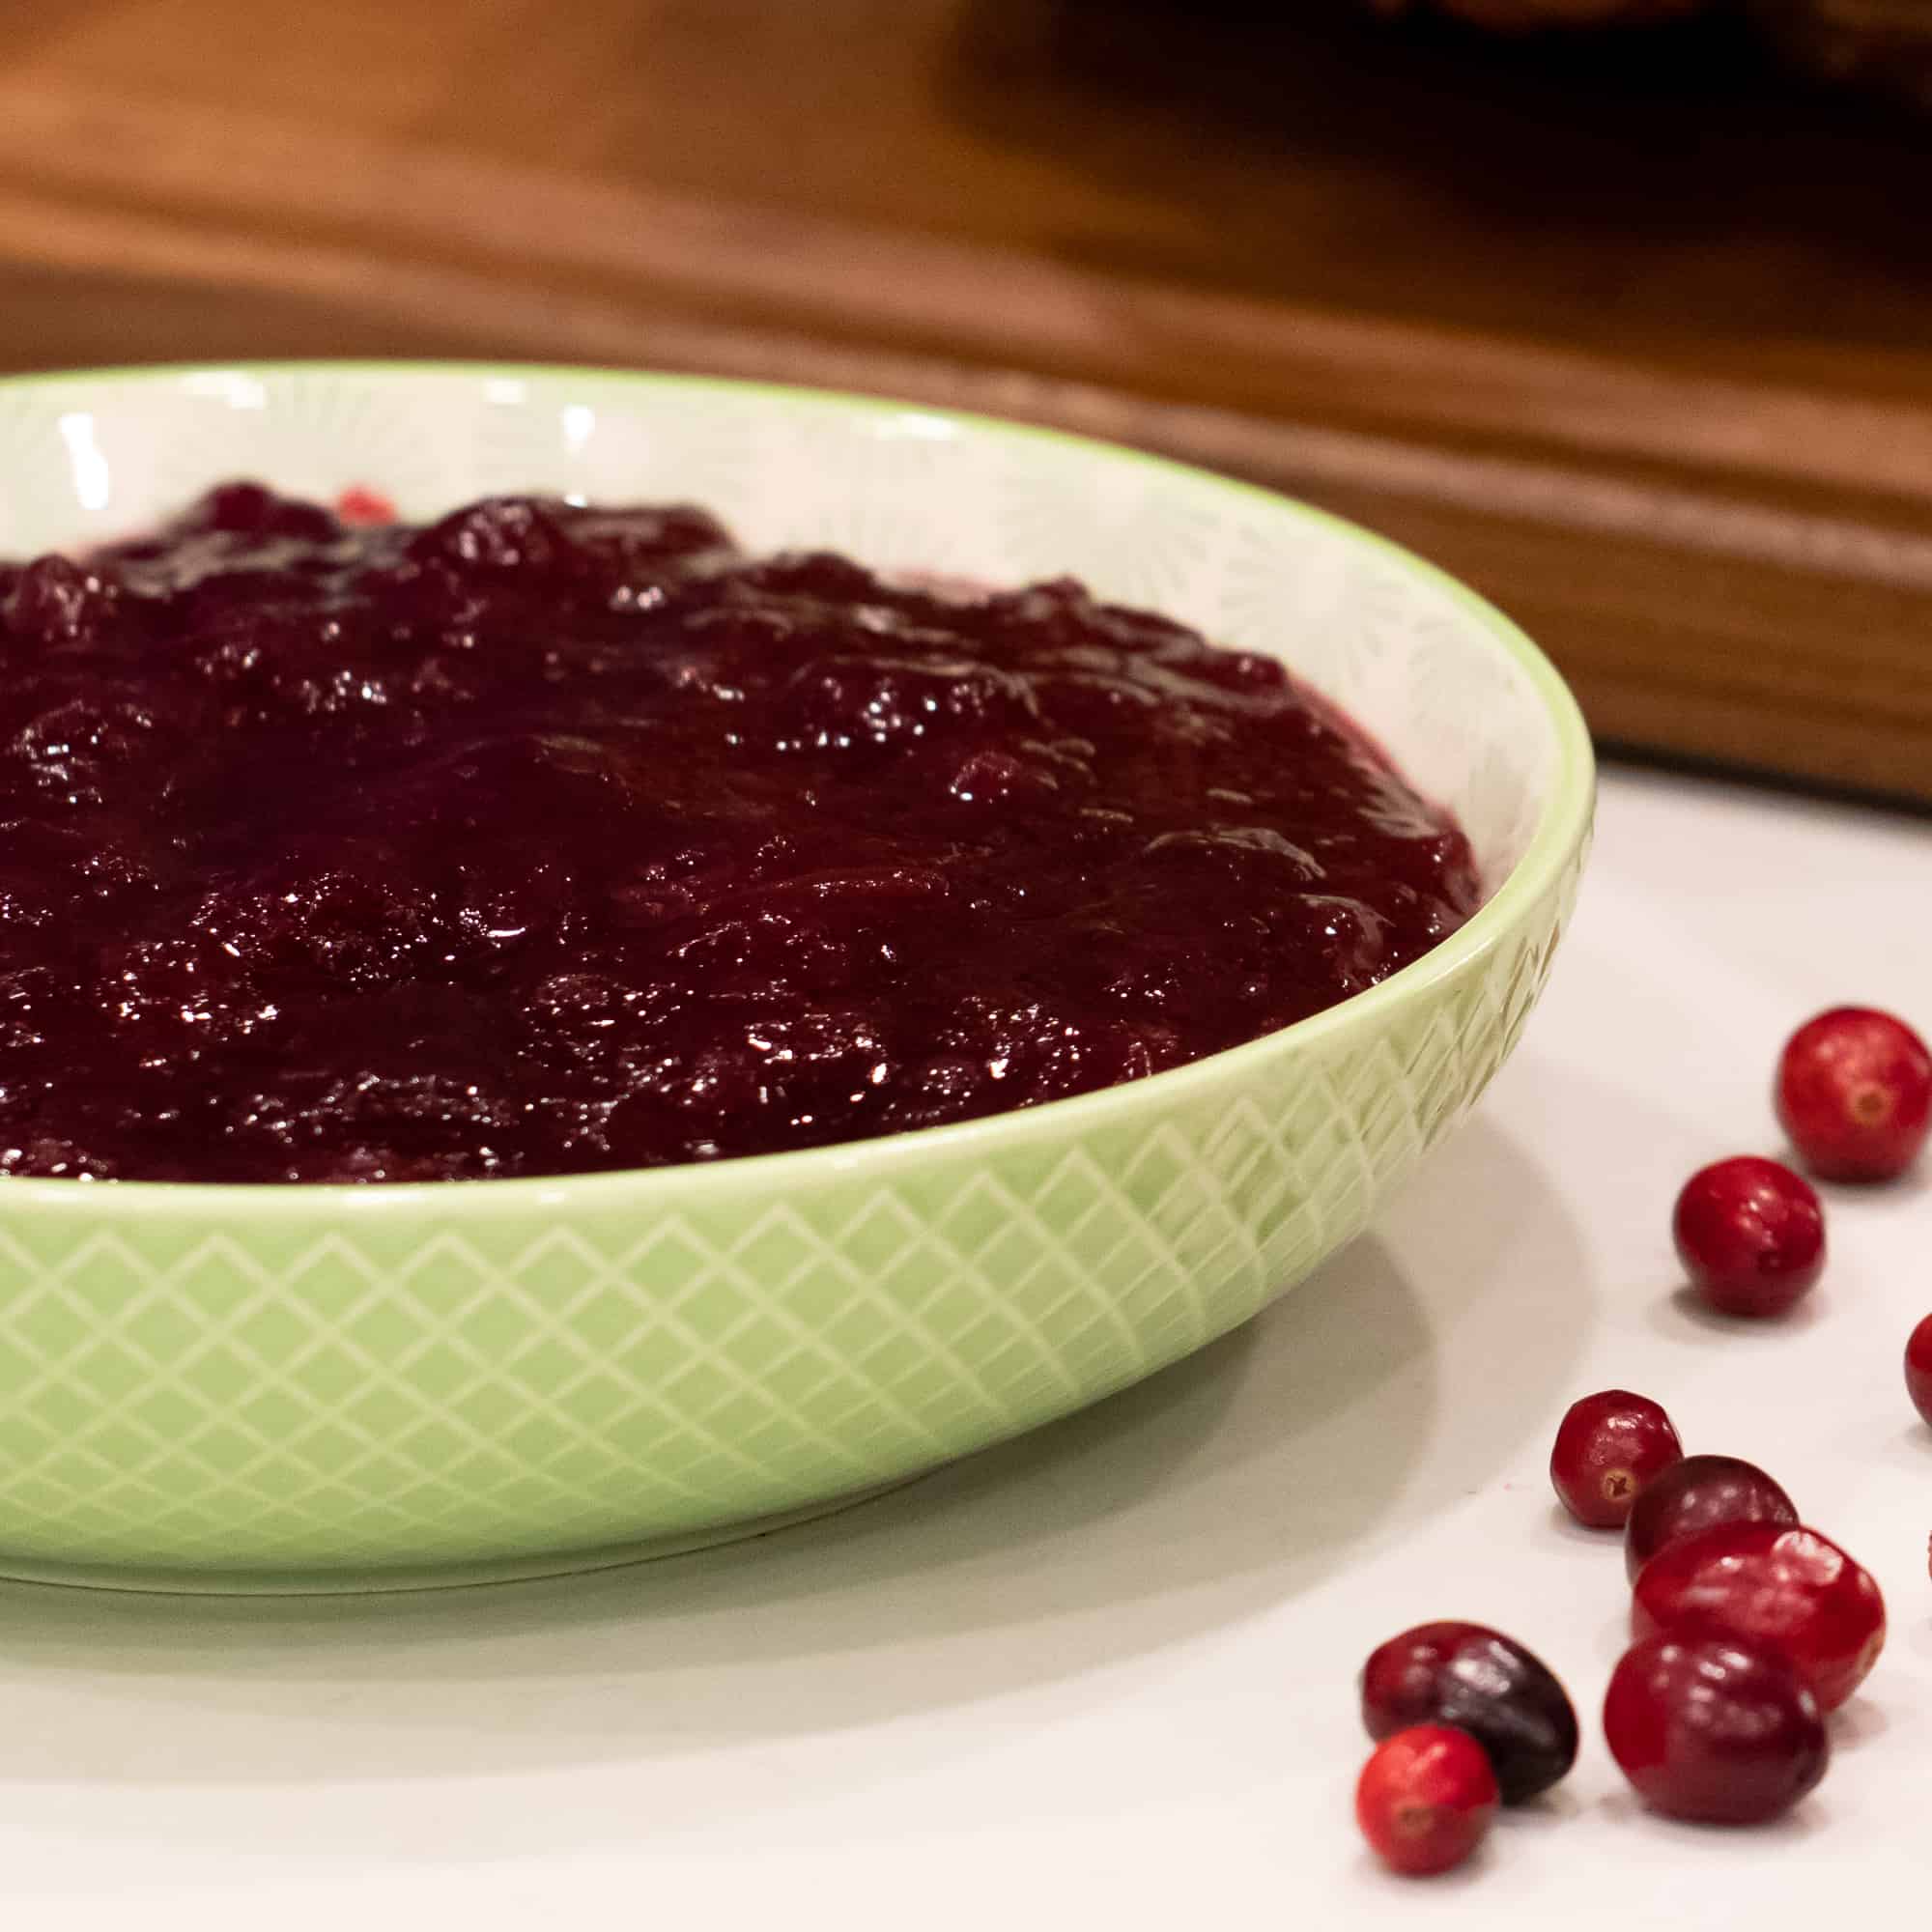 Easy recipe and instructions for how to make homemade cranberry sauce with fresh cranberries. Perfect condiment for thanksgiving or christmas turkey dinner!